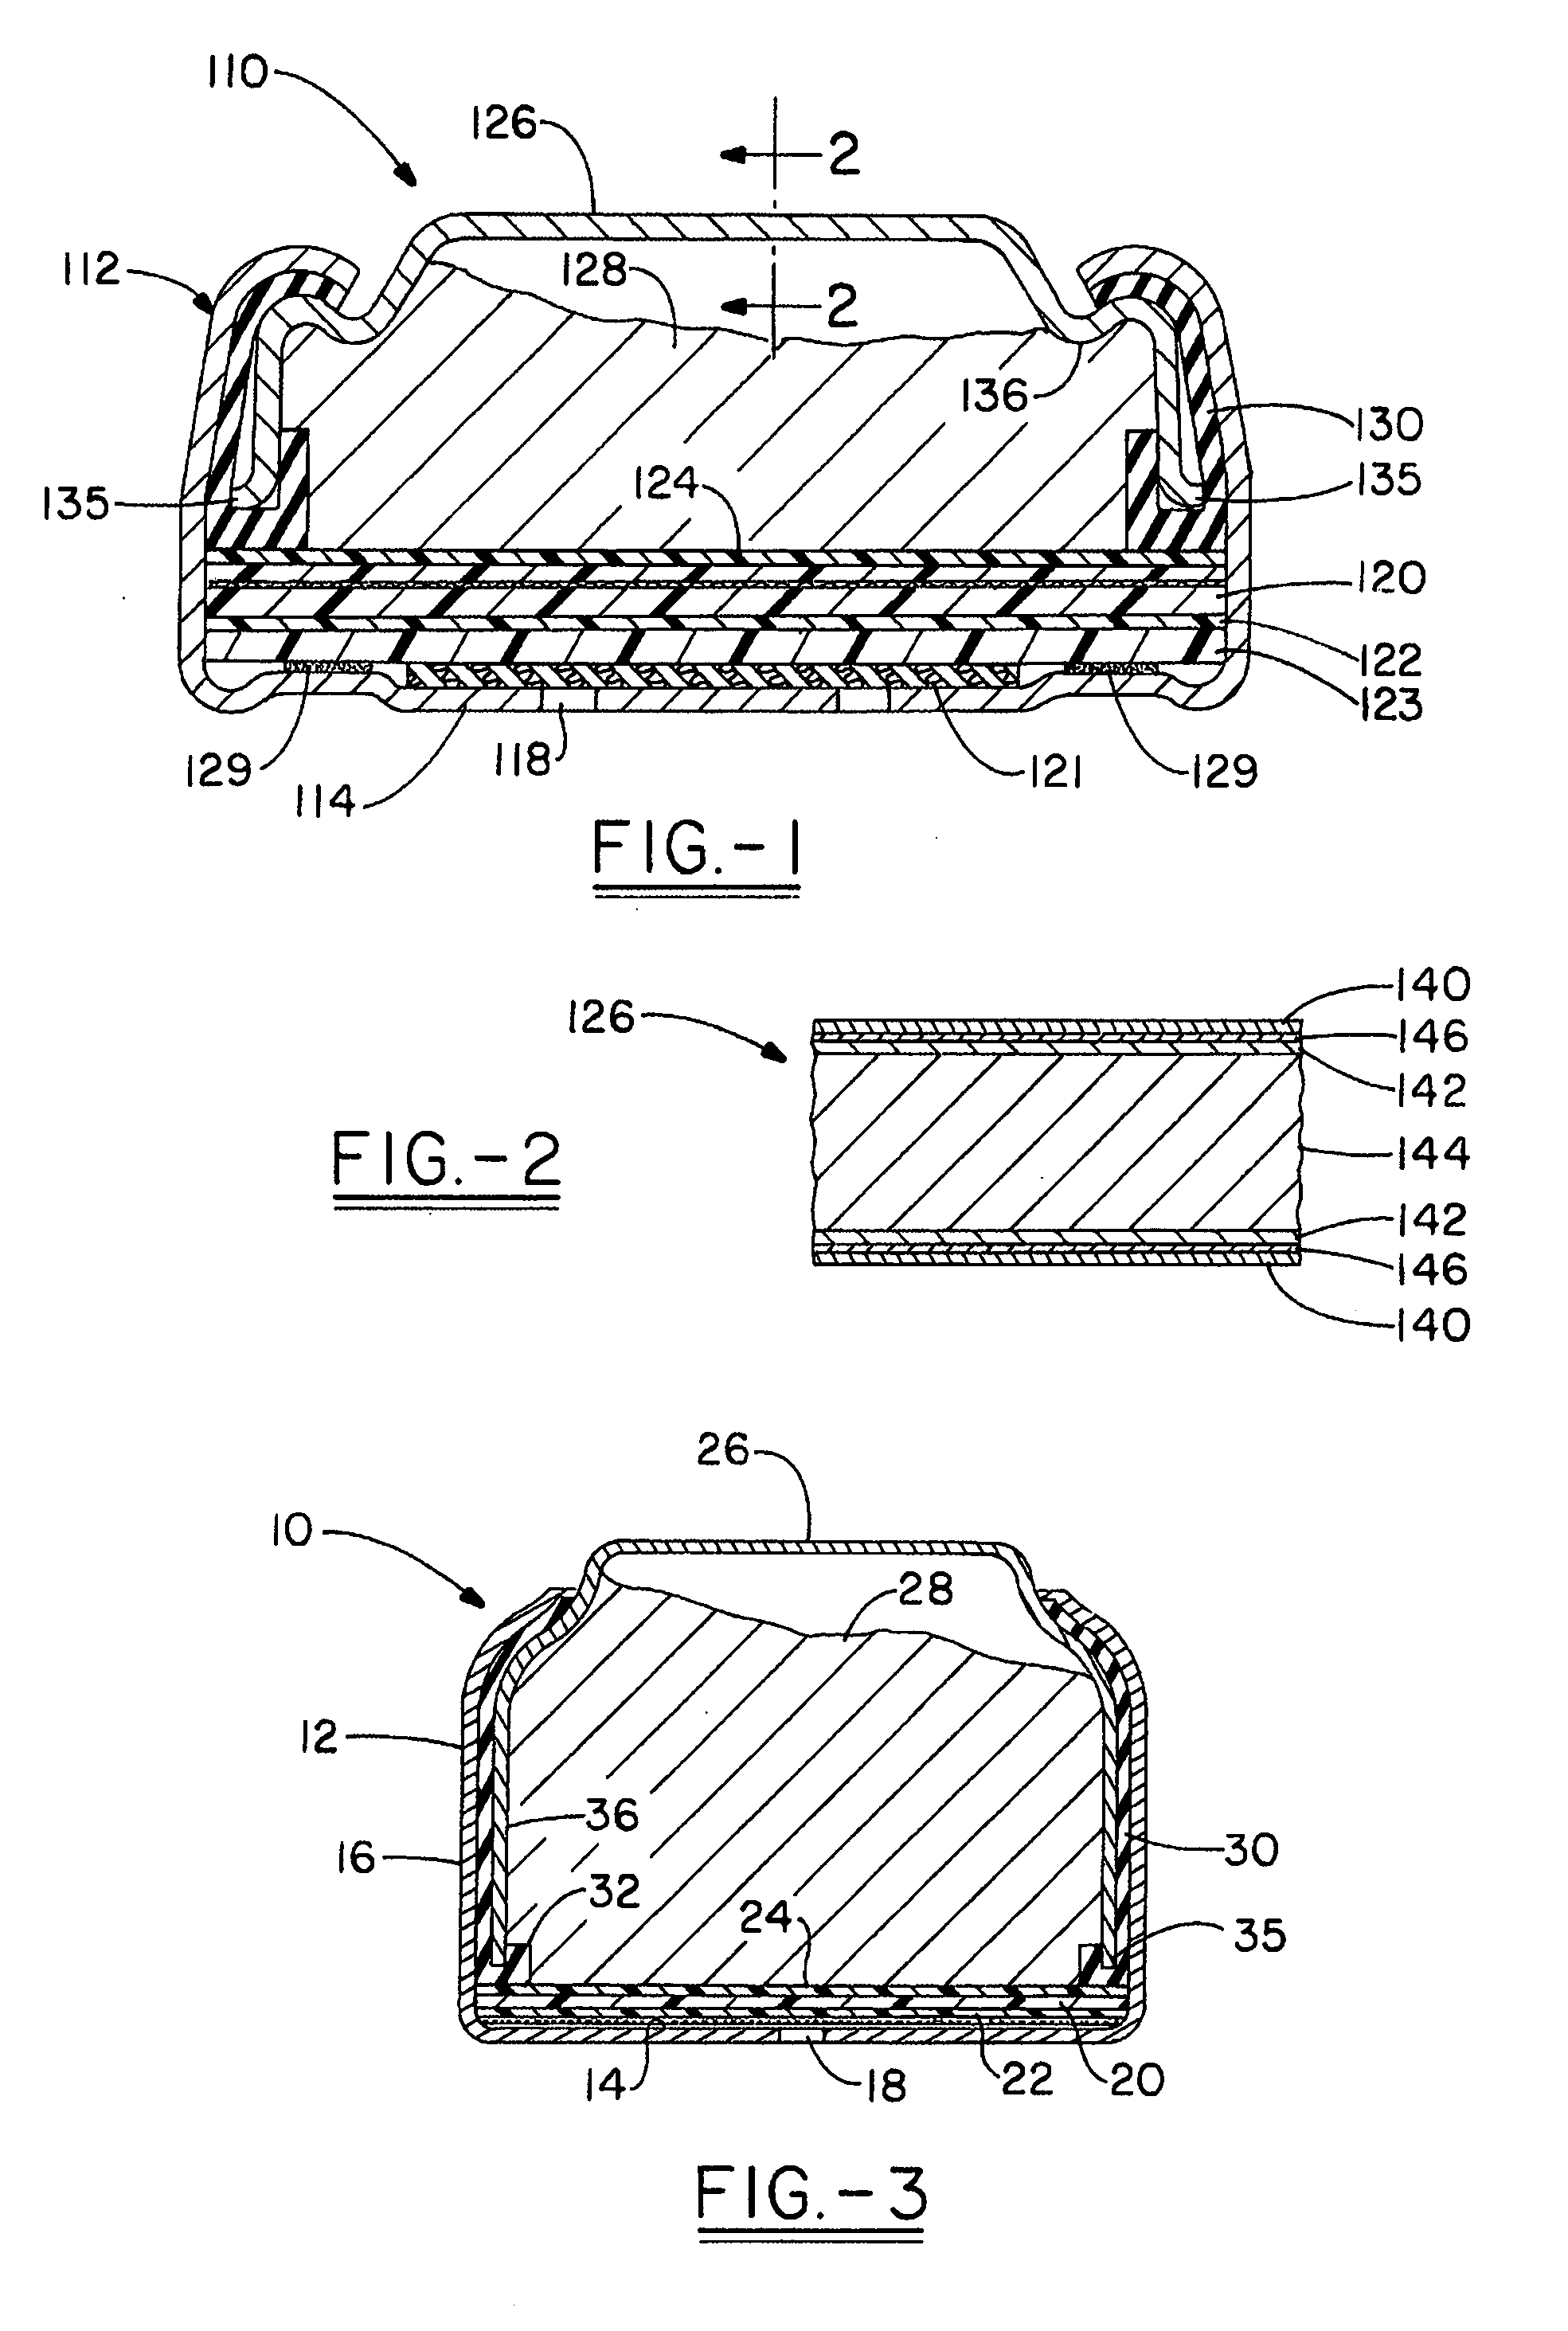 Tin-plated anode casings for alkaline cells